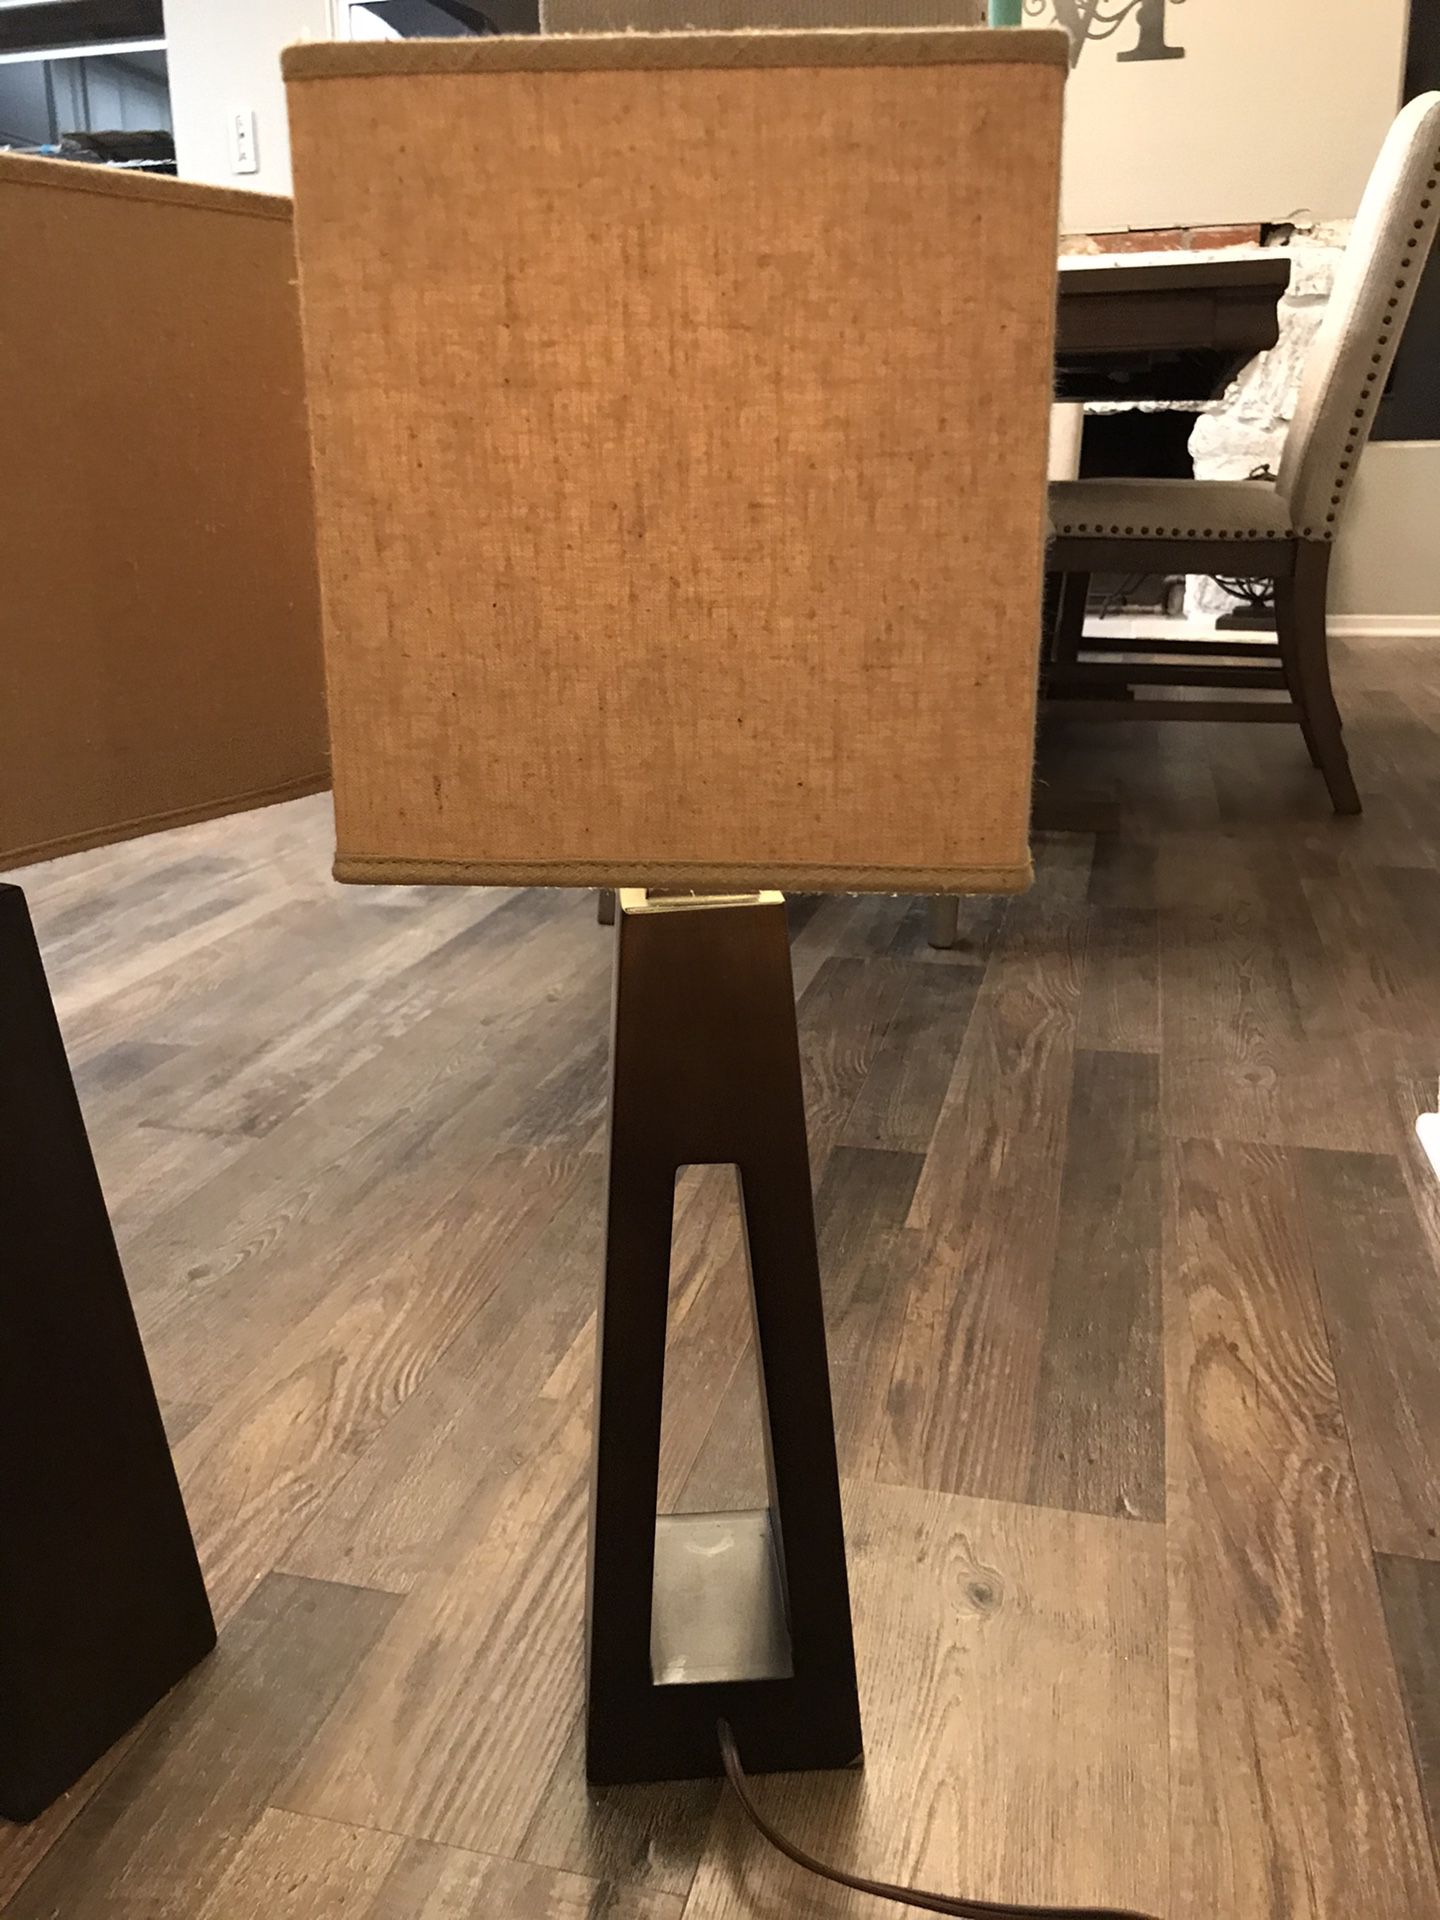 Two brown/tan nightstand lamps